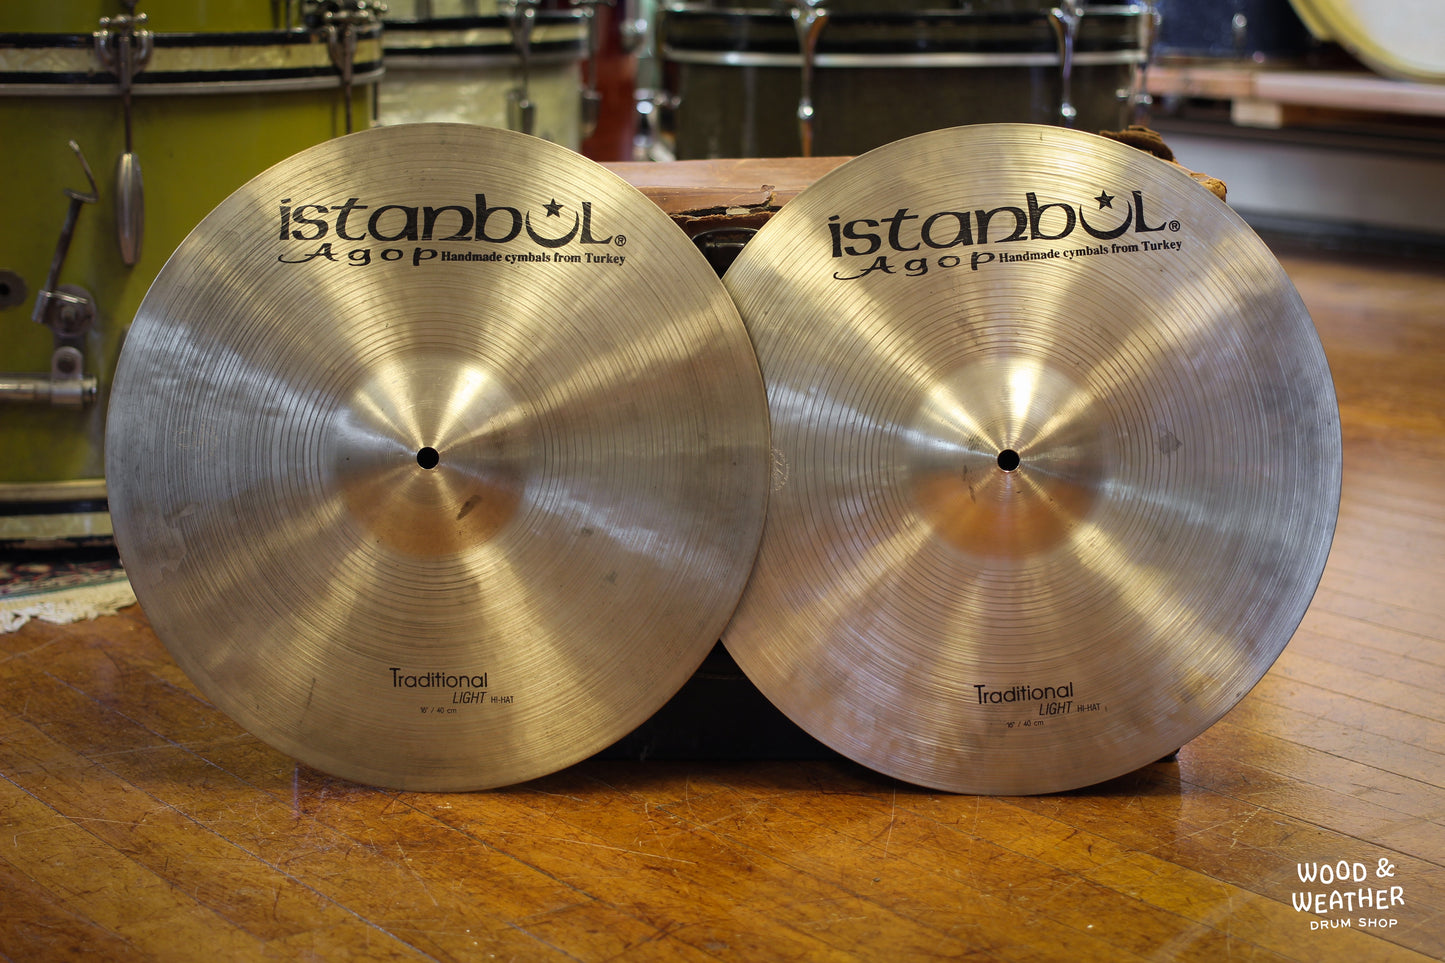 Used Istanbul Agop 16" Traditional Light Hi-Hats 1129/1310g